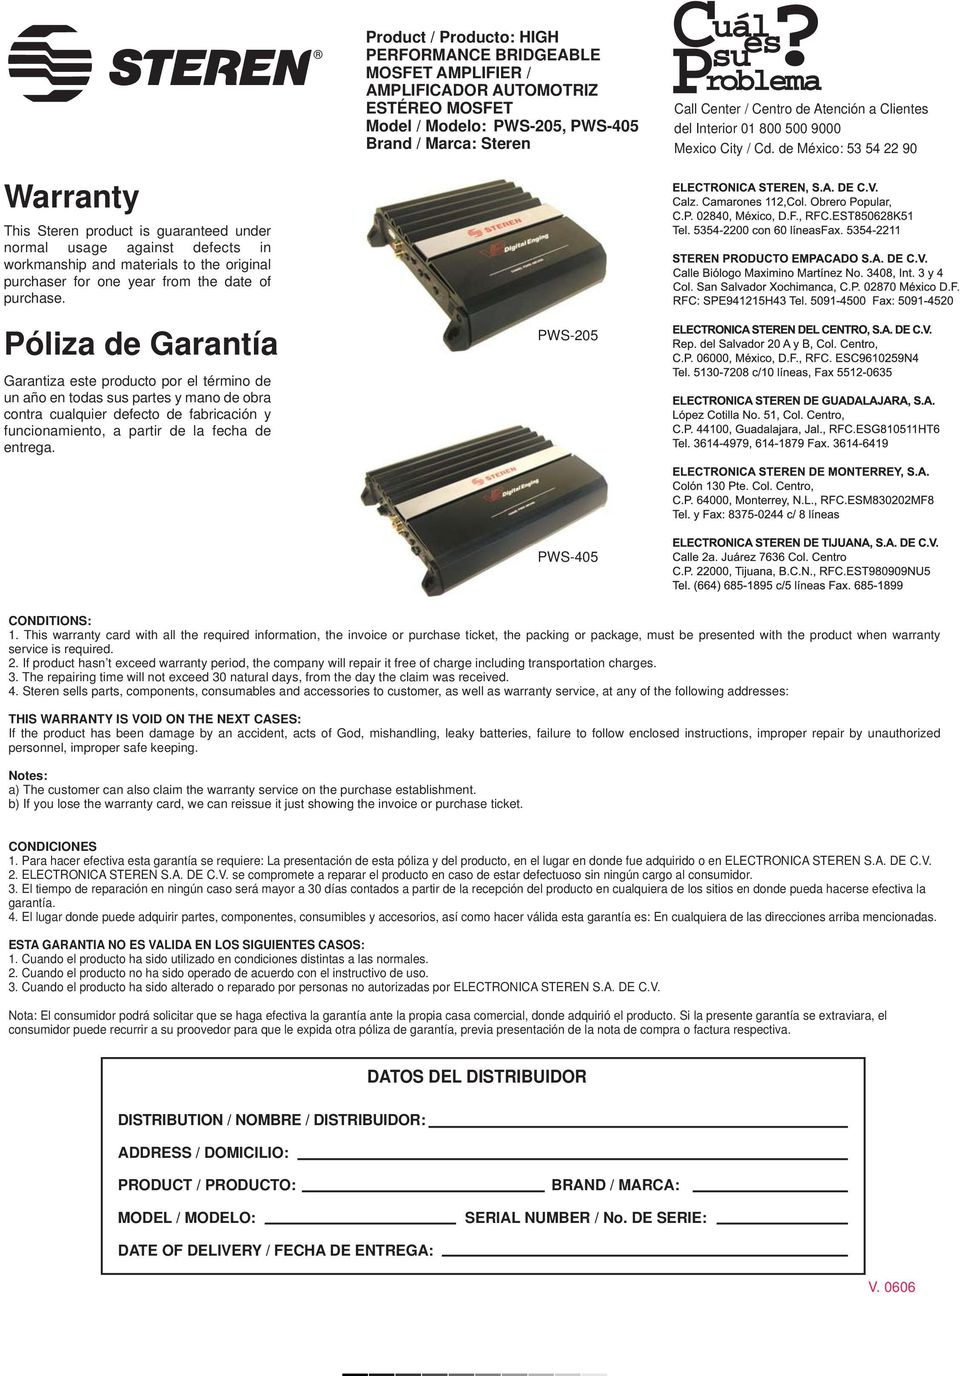 de México: 53 54 22 90 Warranty This Steren product is guaranteed under normal usage against defects in workmanship and materials to the original purchaser for one year from the date of purchase.